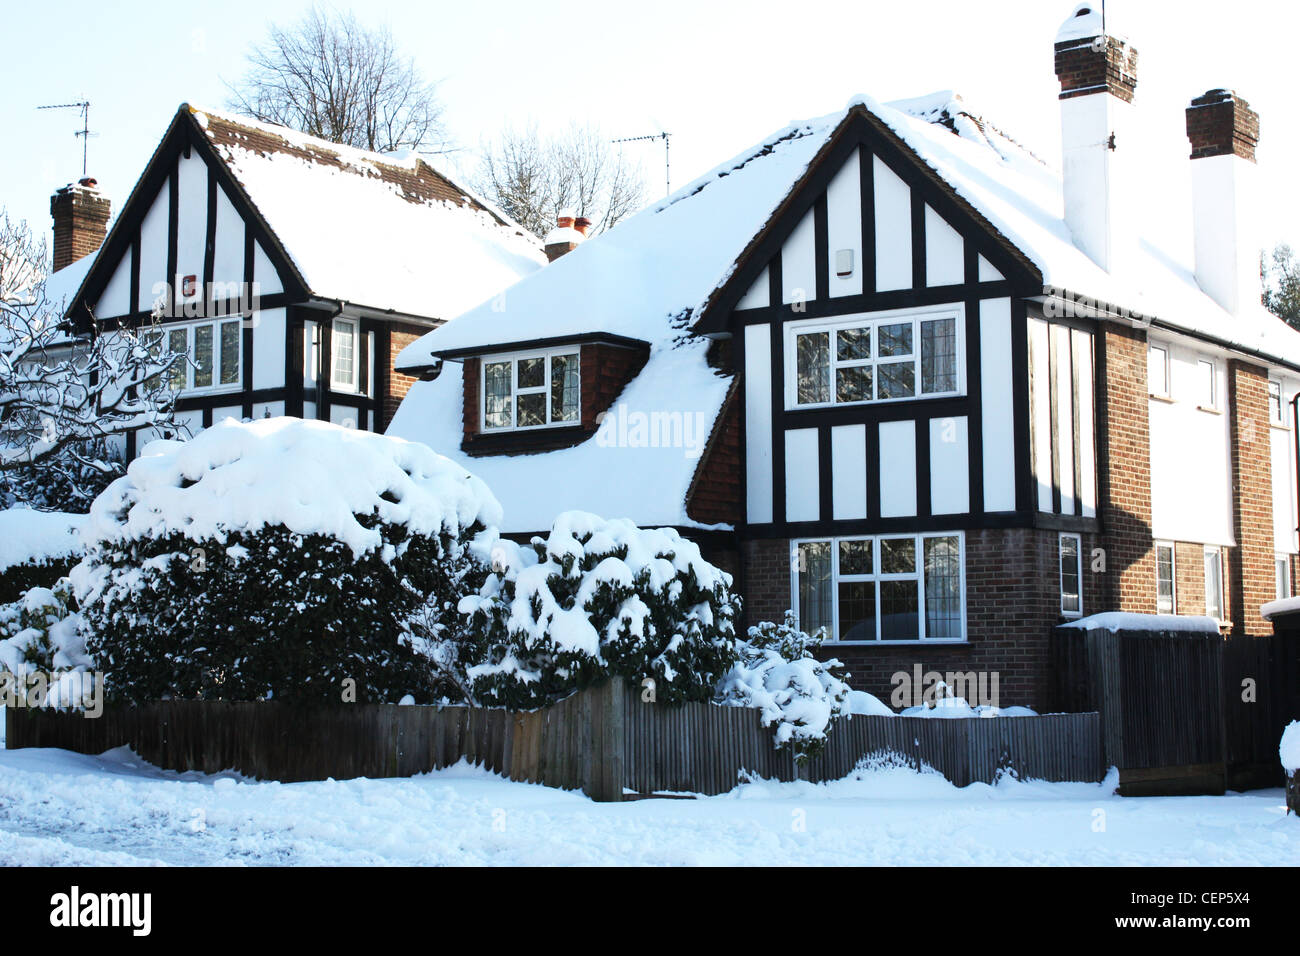 British houses covered in snow during winter season Stock Photo